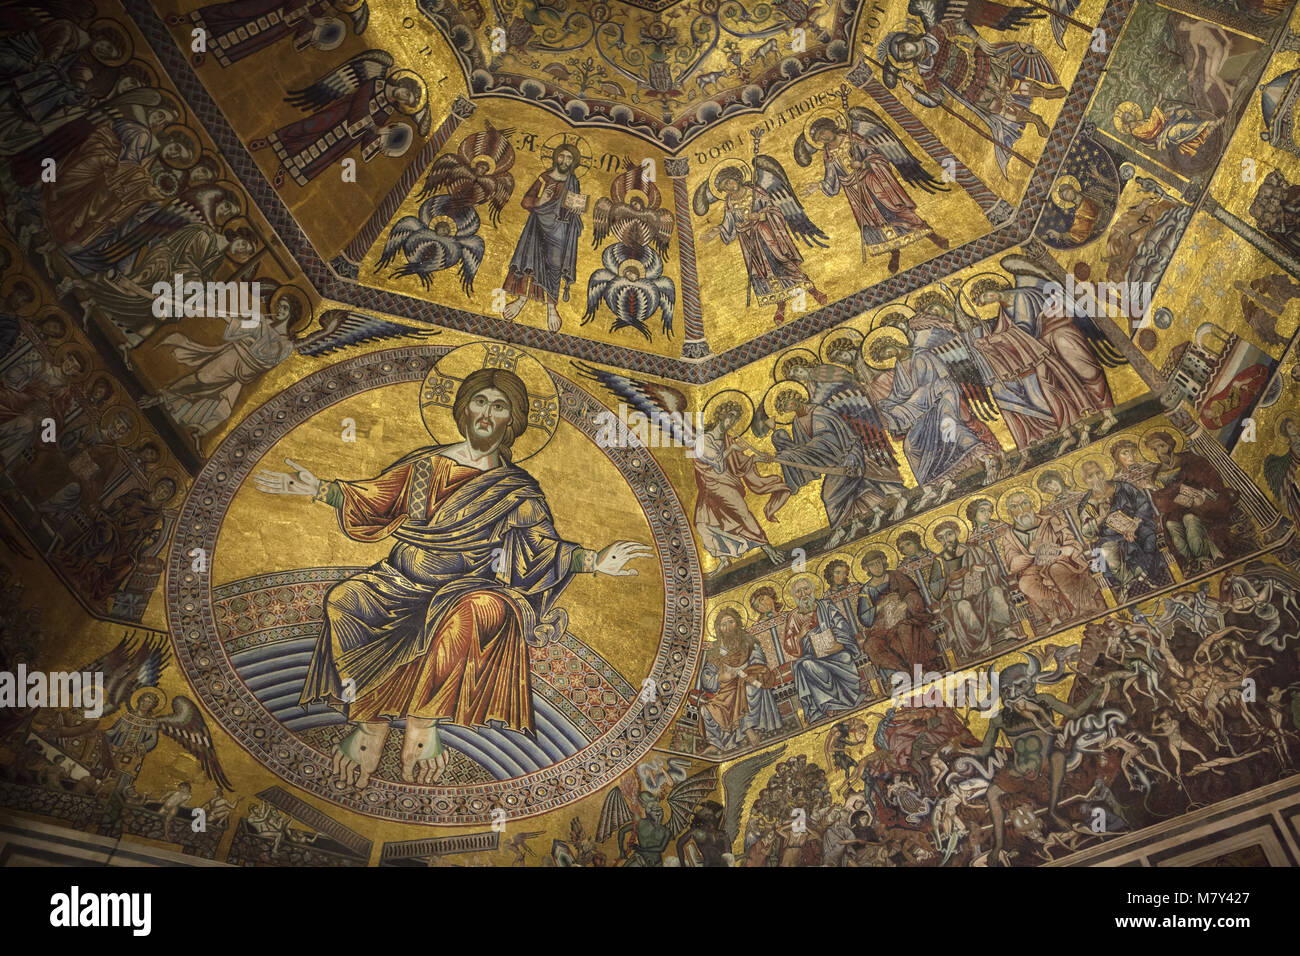 Last Judgement depicted in the medieval mosaics from the 13th century inside the octagonal dome in the Battistero di San Giovanni (Florence Baptistery) in Florence, Tuscany, Italy. Stock Photo